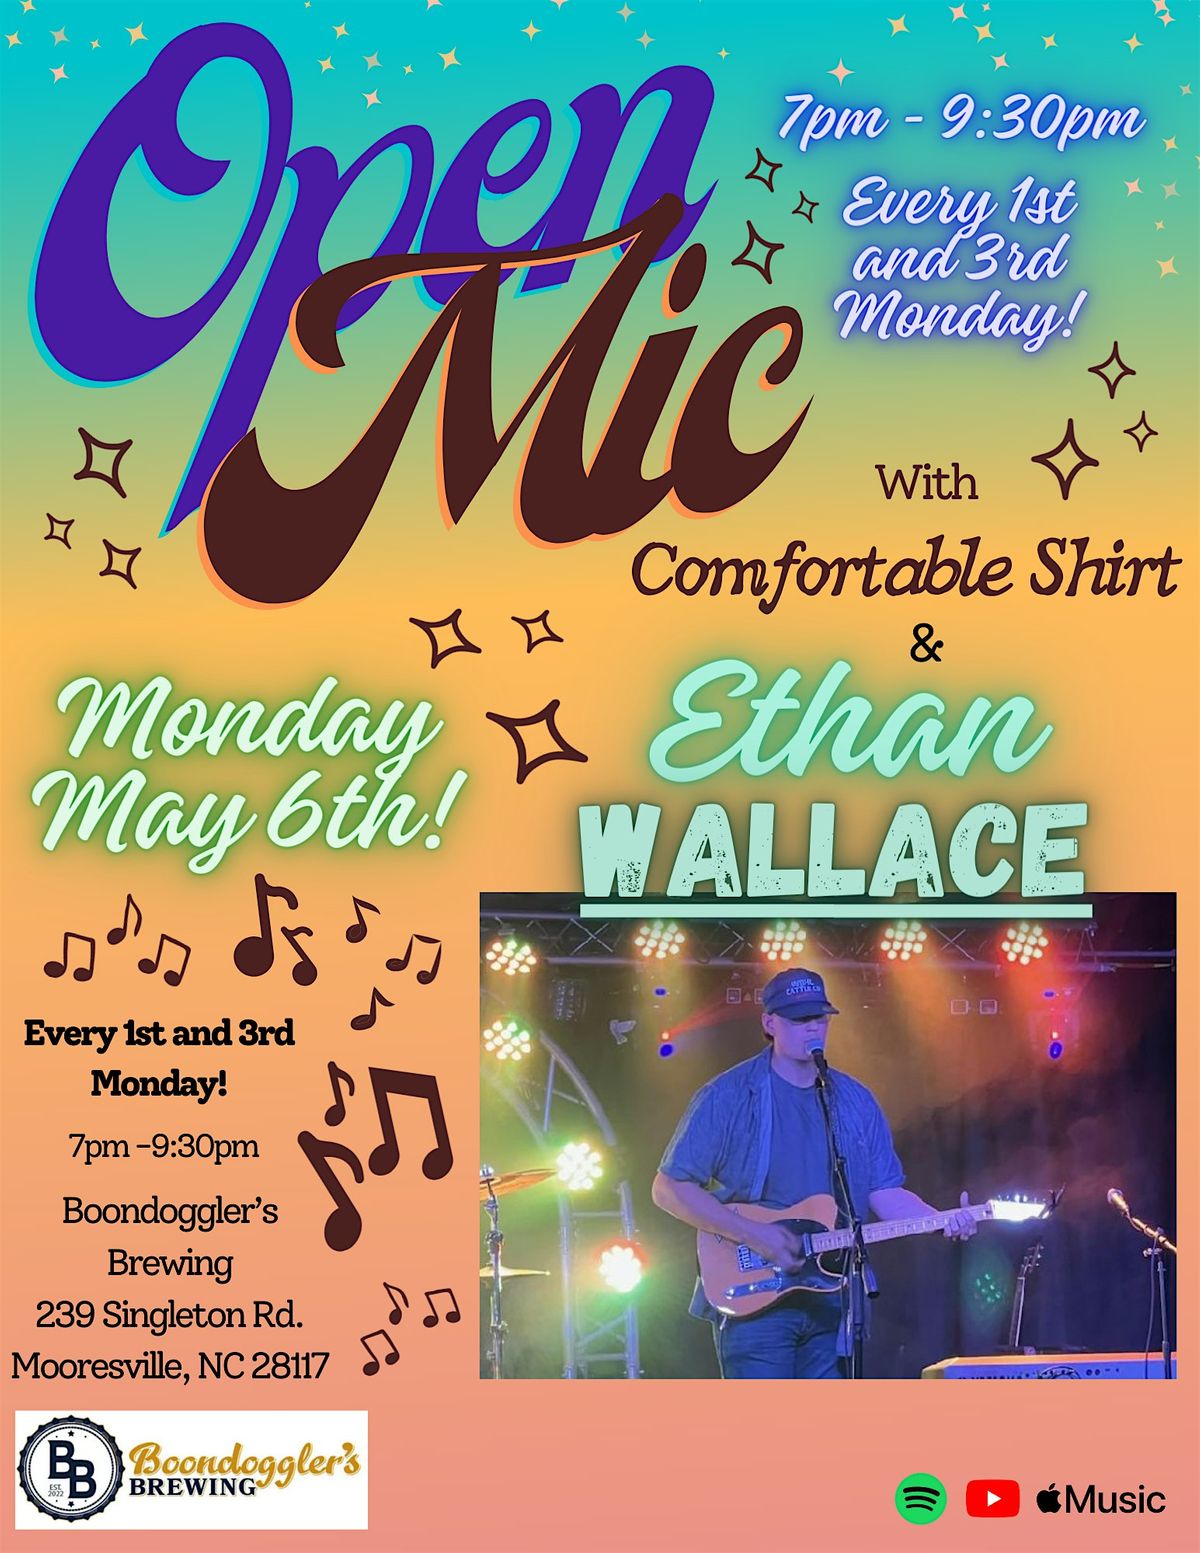 Open Mic at Boondoggler's Brewing featuring Ethan Wallace!